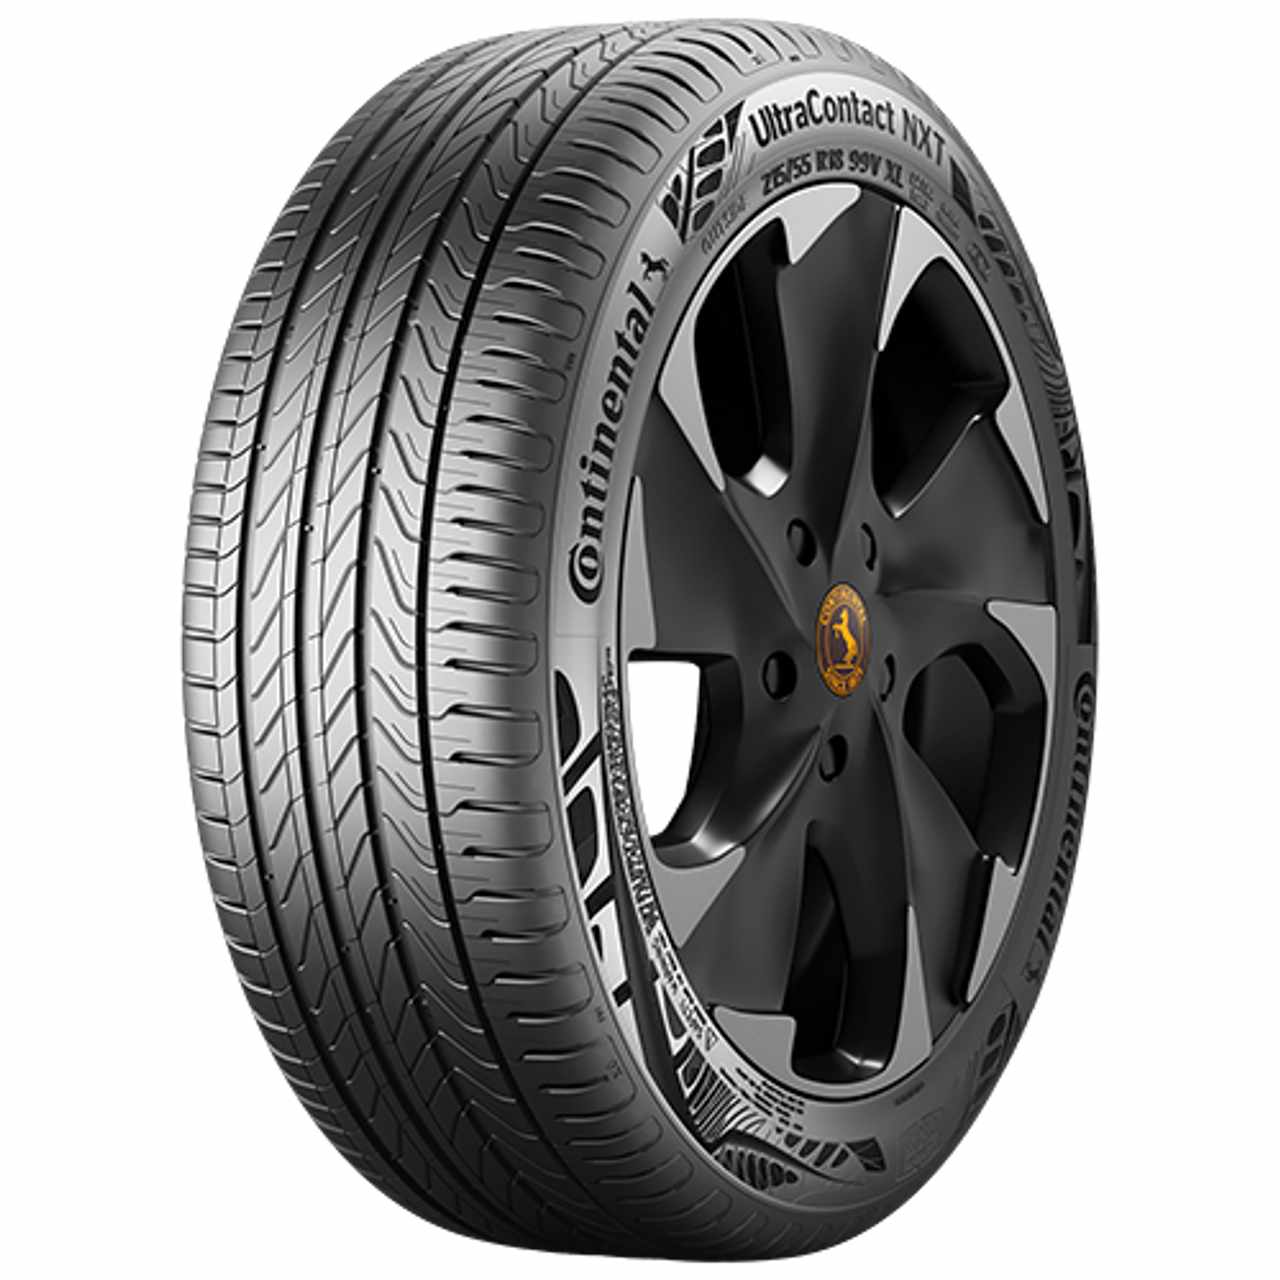 CONTINENTAL ULTRACONTACT NXT (EVc) 235/55R18 104W FR BSW